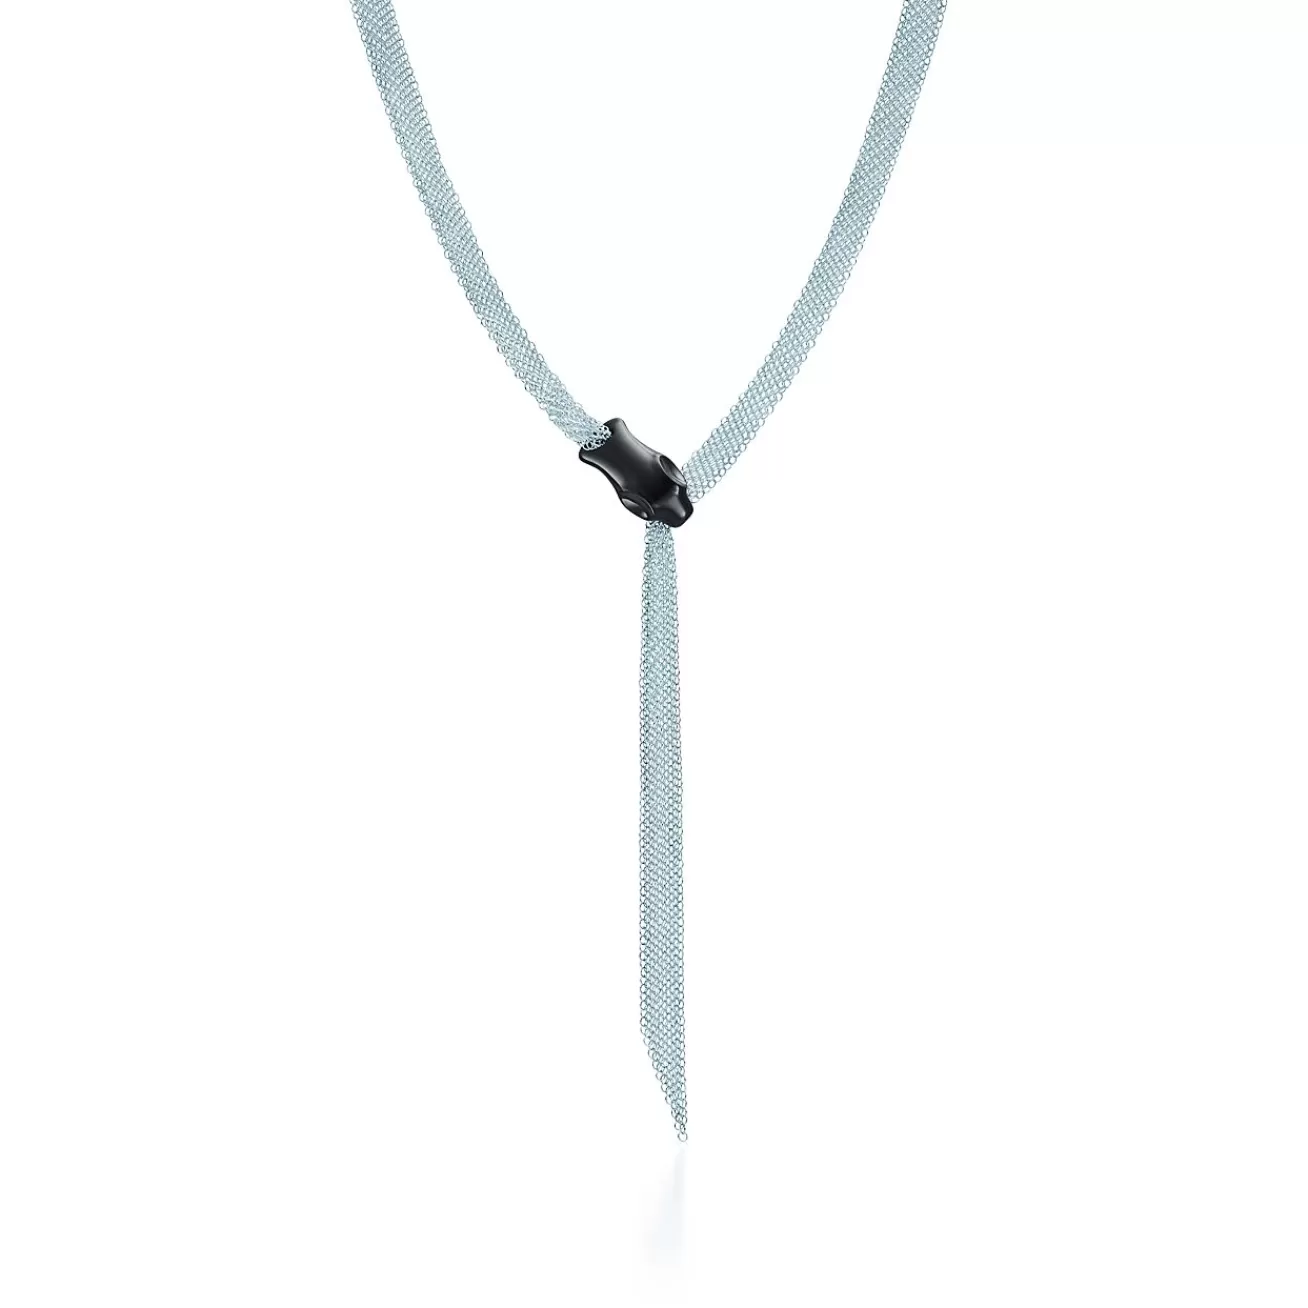 Tiffany & Co. Elsa Peretti® Snake necklace in sterling silver mesh with black jade. | ^ Necklaces & Pendants | Sterling Silver Jewelry